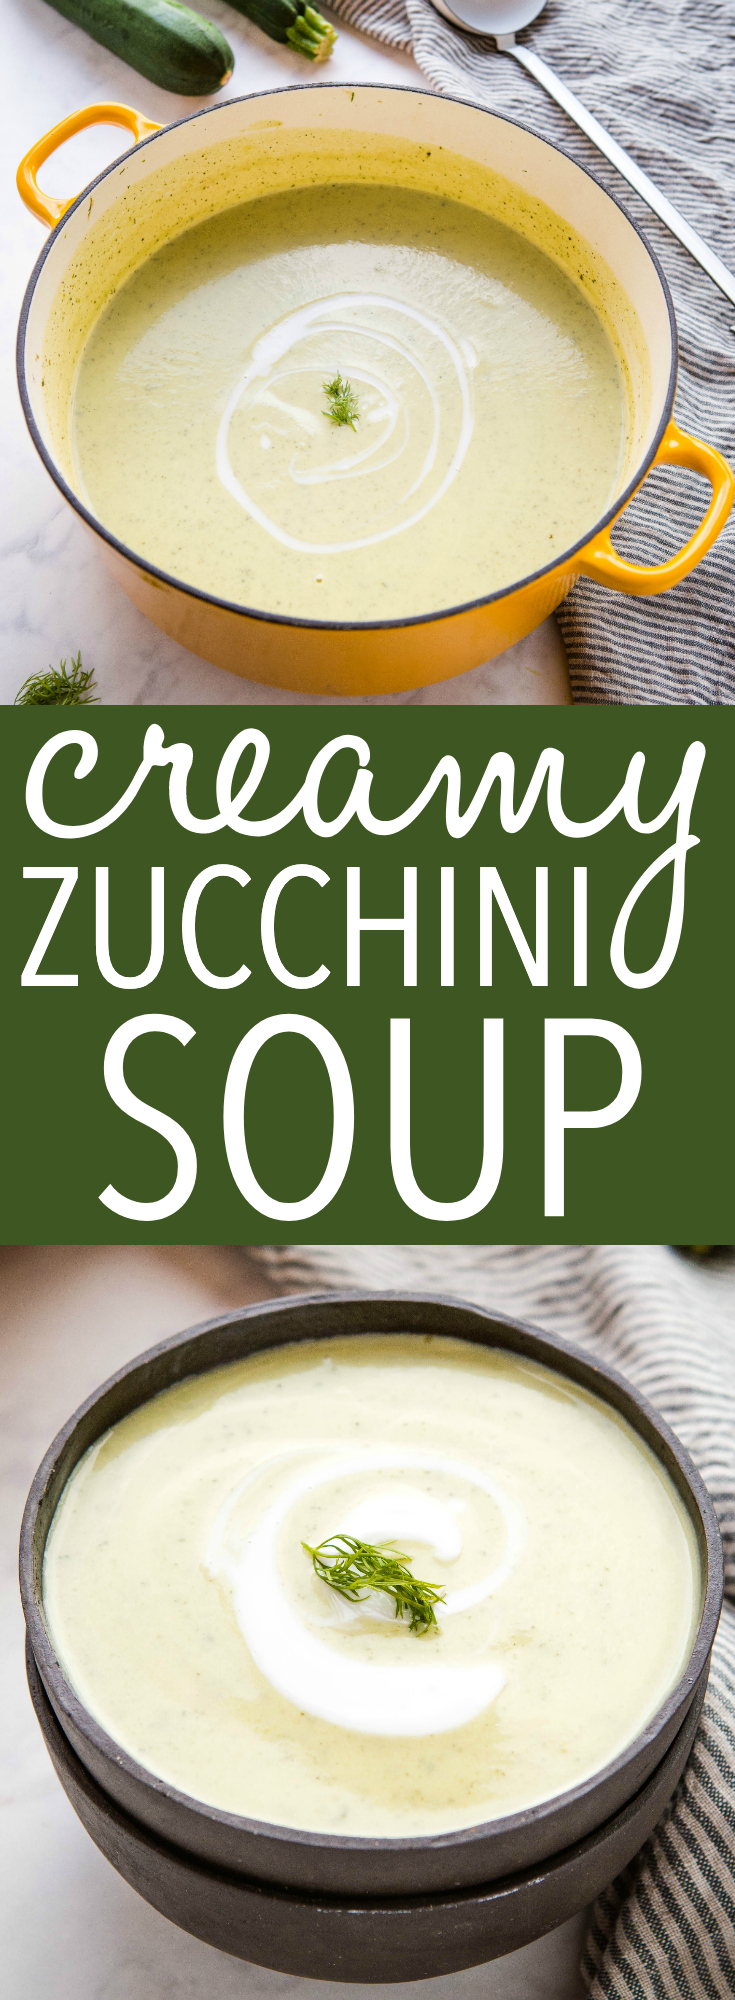 This Creamy Zucchini Soup recipe is the perfect way to use up all those garden zucchini! A simple vegetarian soup recipe made with fresh zucchini and herbs (with a dairy-free option)! Recipe from thebusybaker.ca! #zucchinisoup #garden #creamy #dairyfree #homemadesoup #recipe #gardening via @busybakerblog